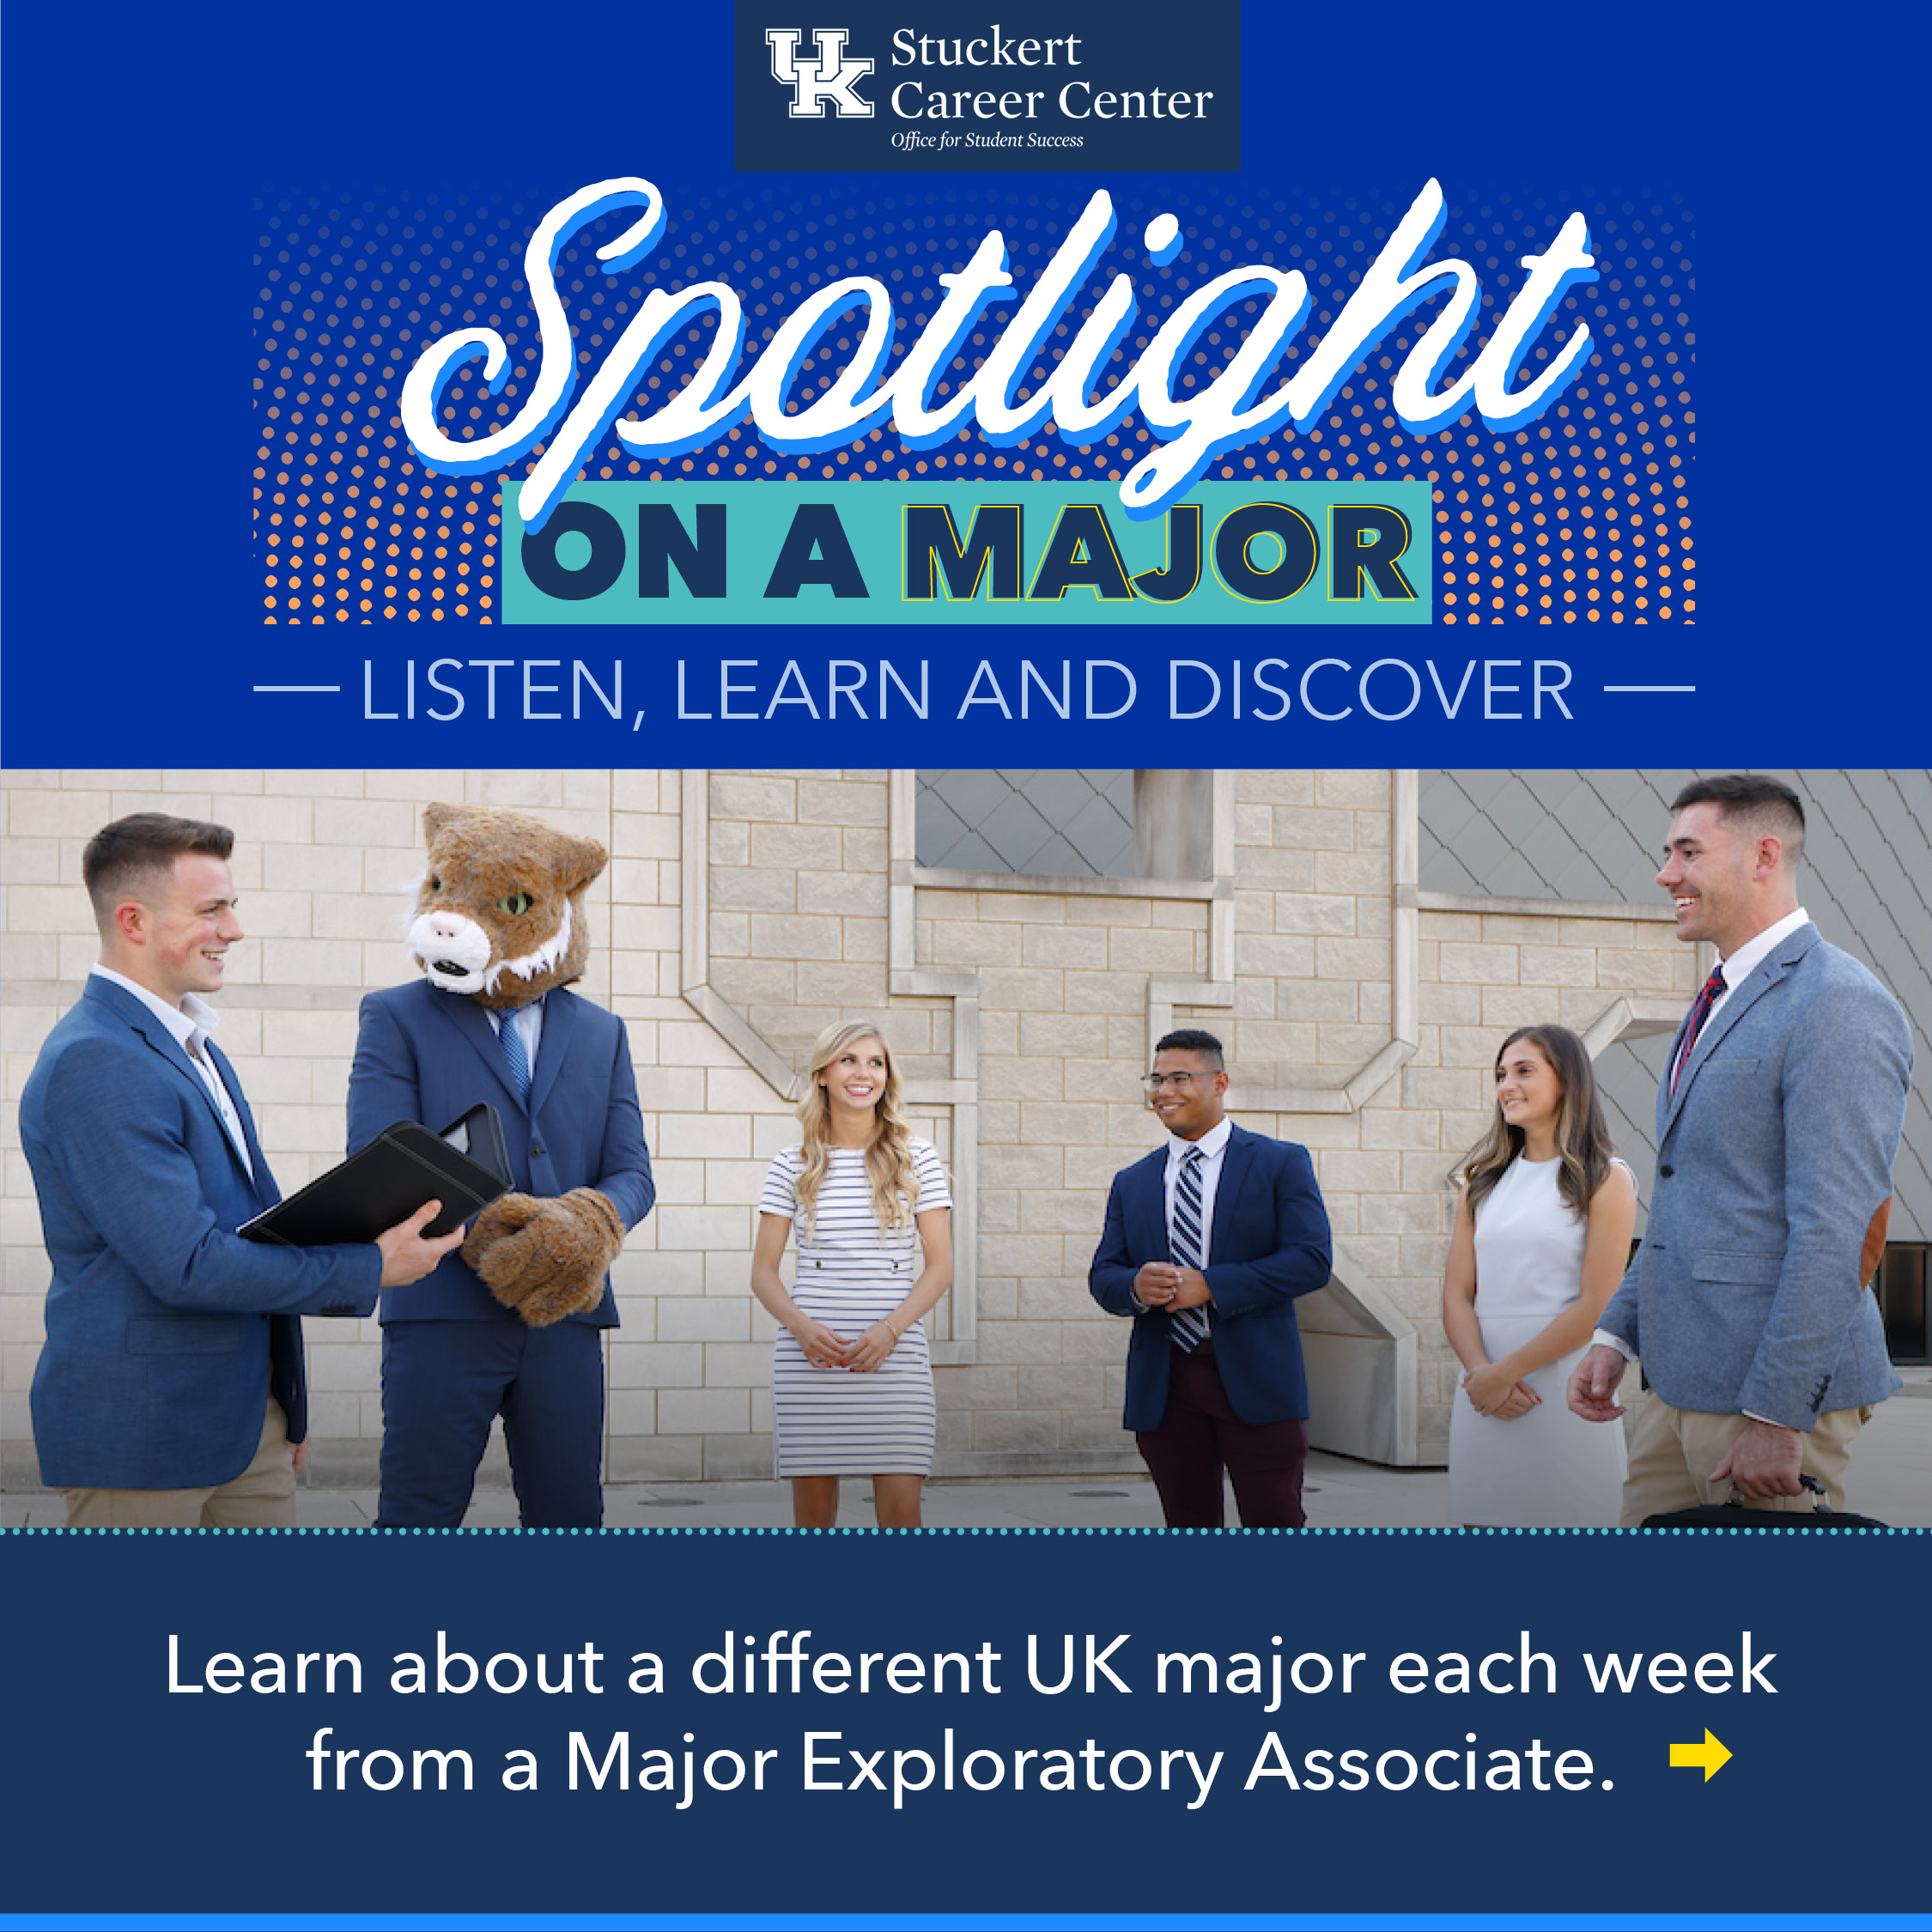 a graphic stating "learn about a different UK major each week from a Major Exploratory Associate" with a photograph of the UK mascot Scratch in a buisiness suit and other formally dressed students